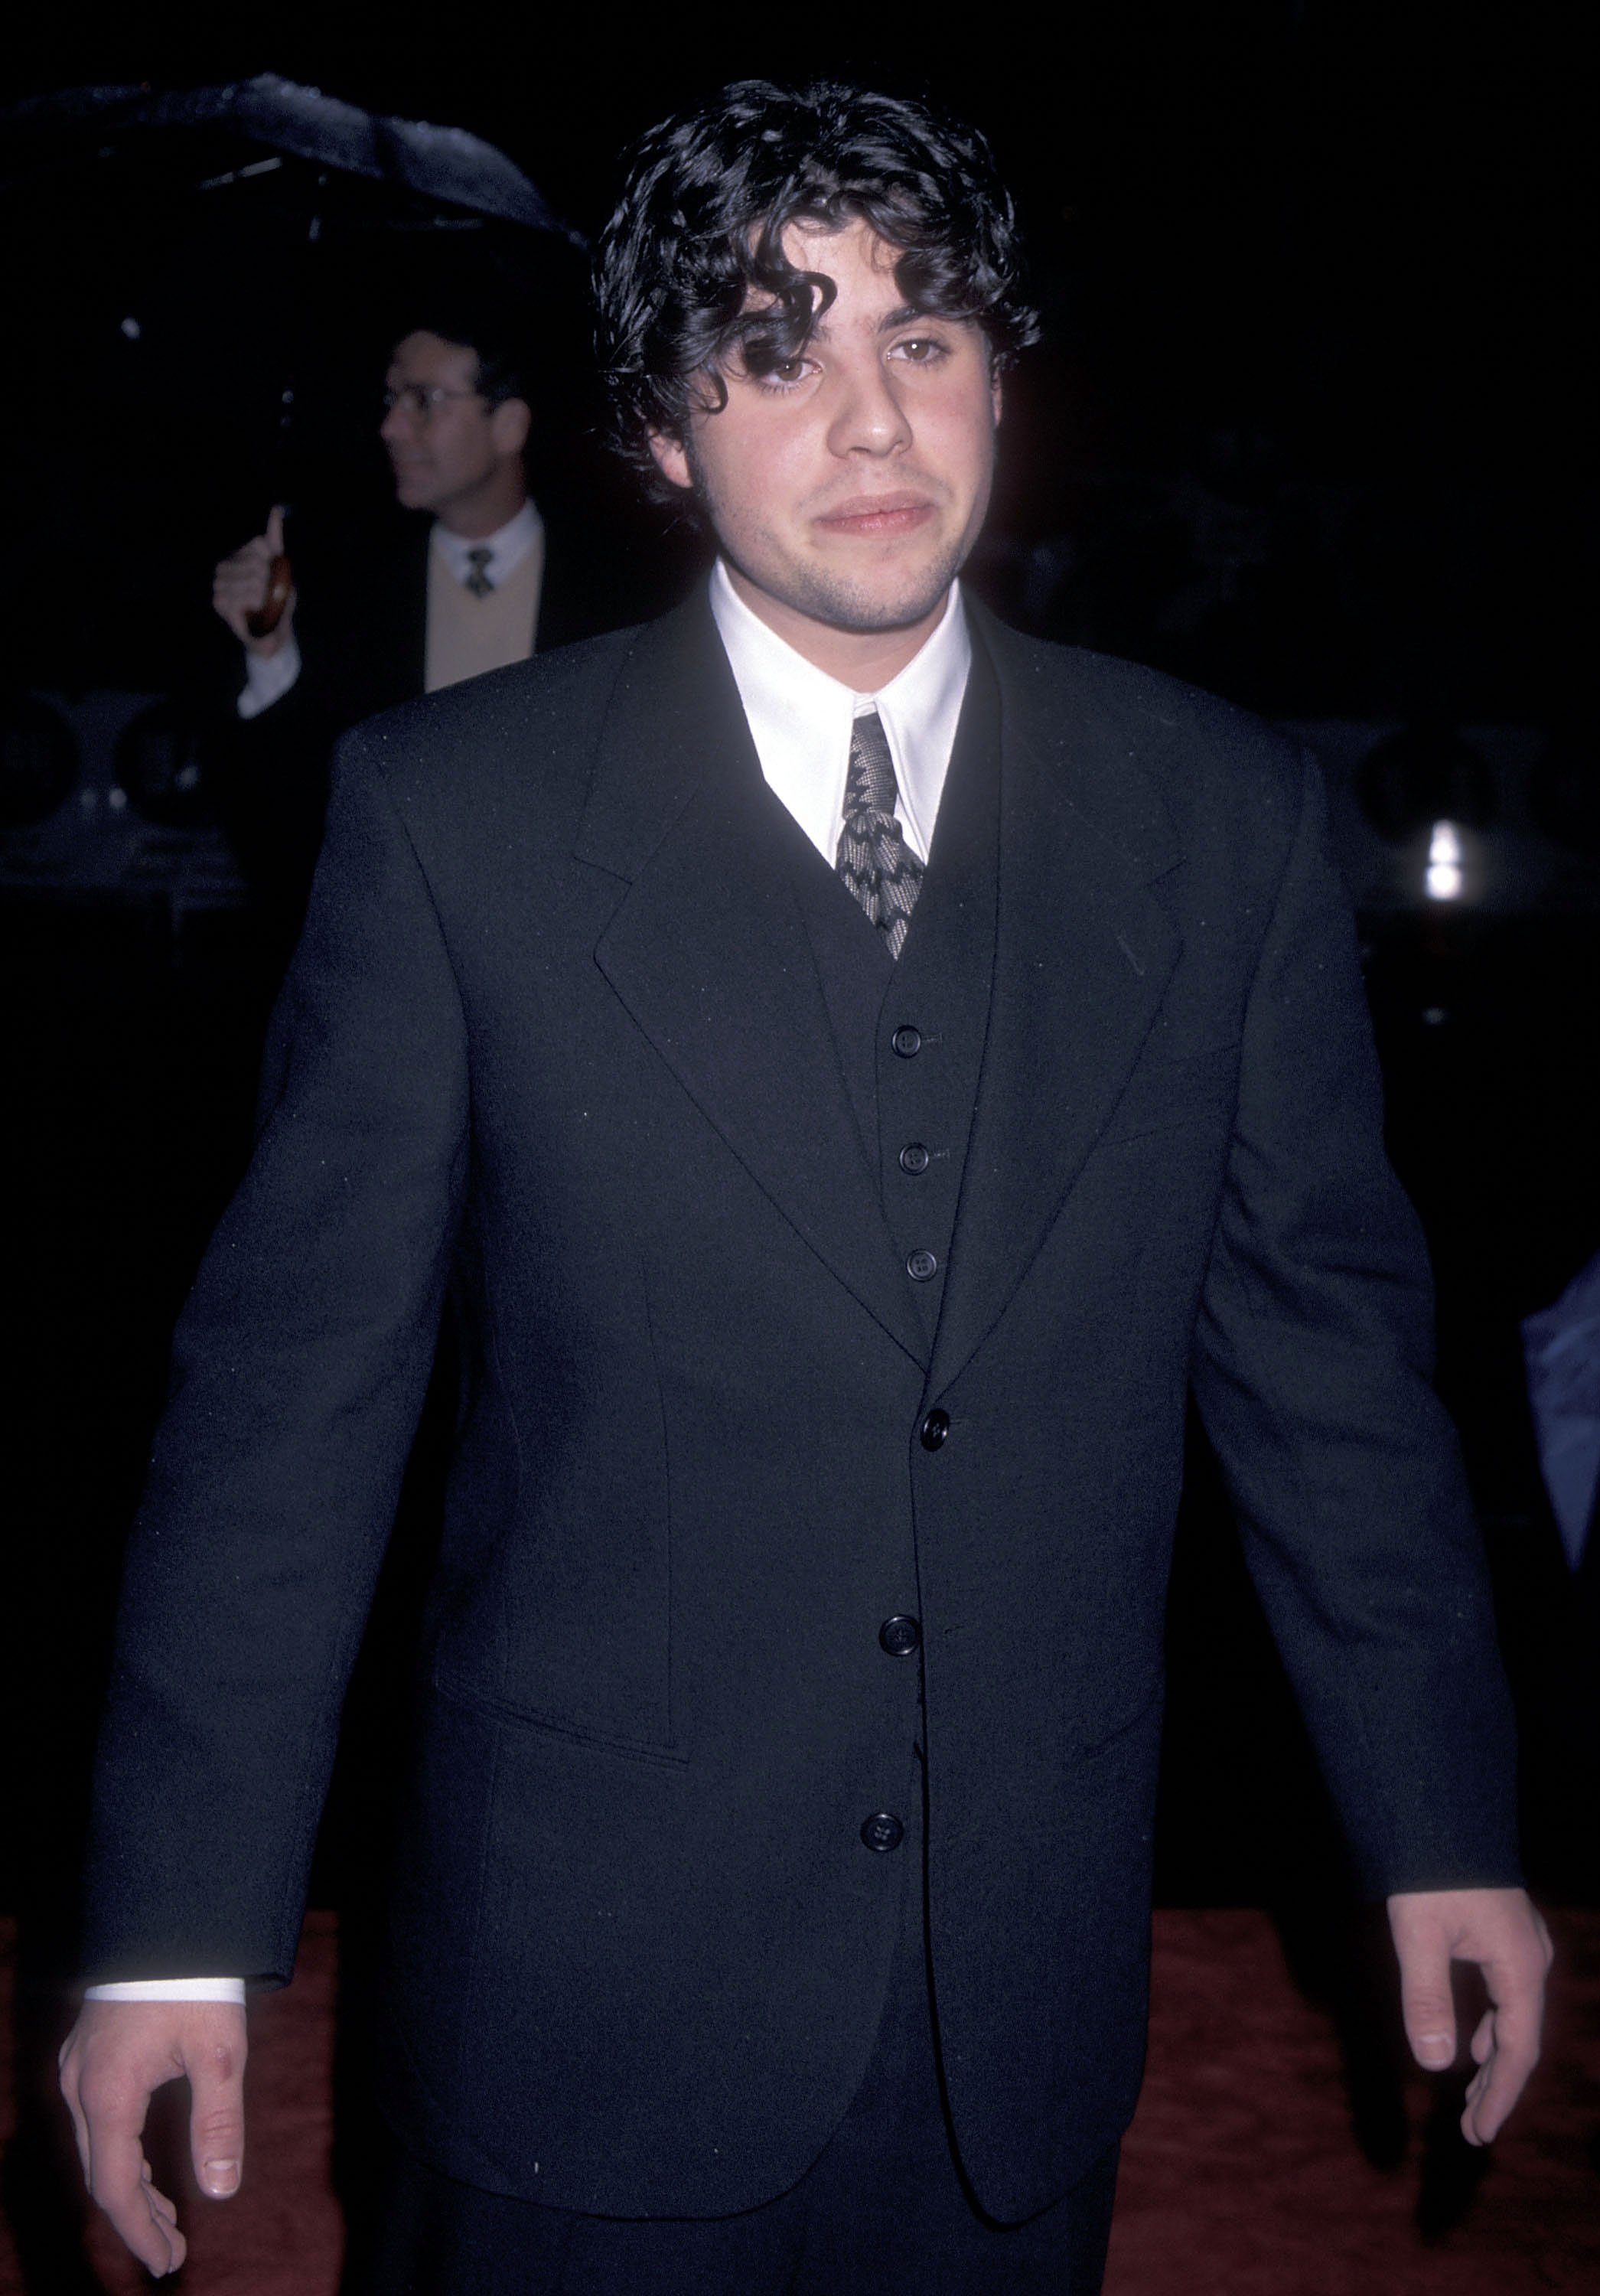 Sage Stallone at the "Daylight" Hollywood premiere at the Mann's Chinese Theatre in Hollywood, California on December 5, 1996. | Source: Getty Images